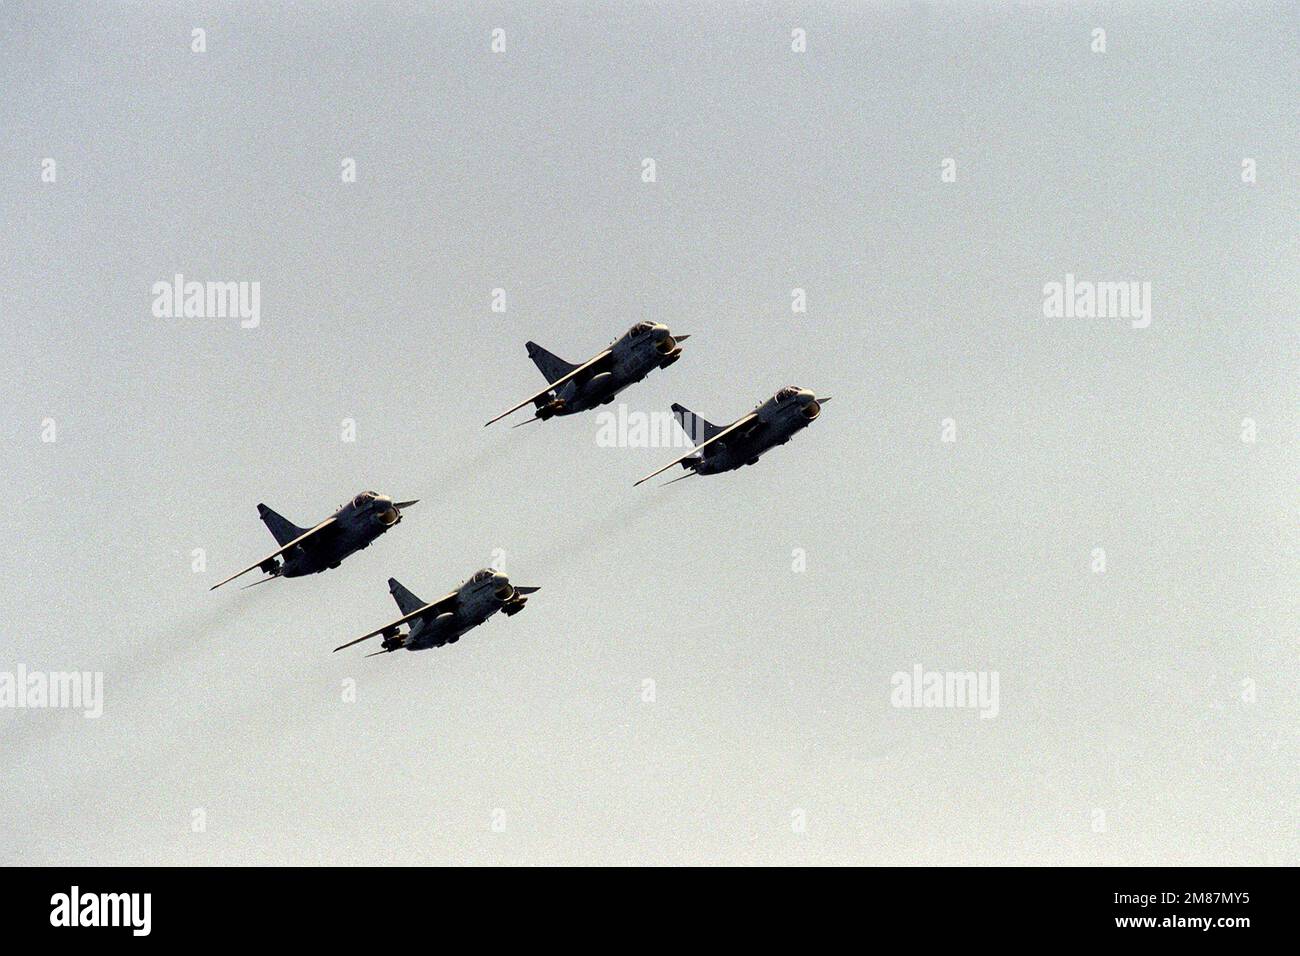 A right side view of four A-7E Corsair II aircraft in formation. Country: Indian Ocean (IOC) Stock Photo